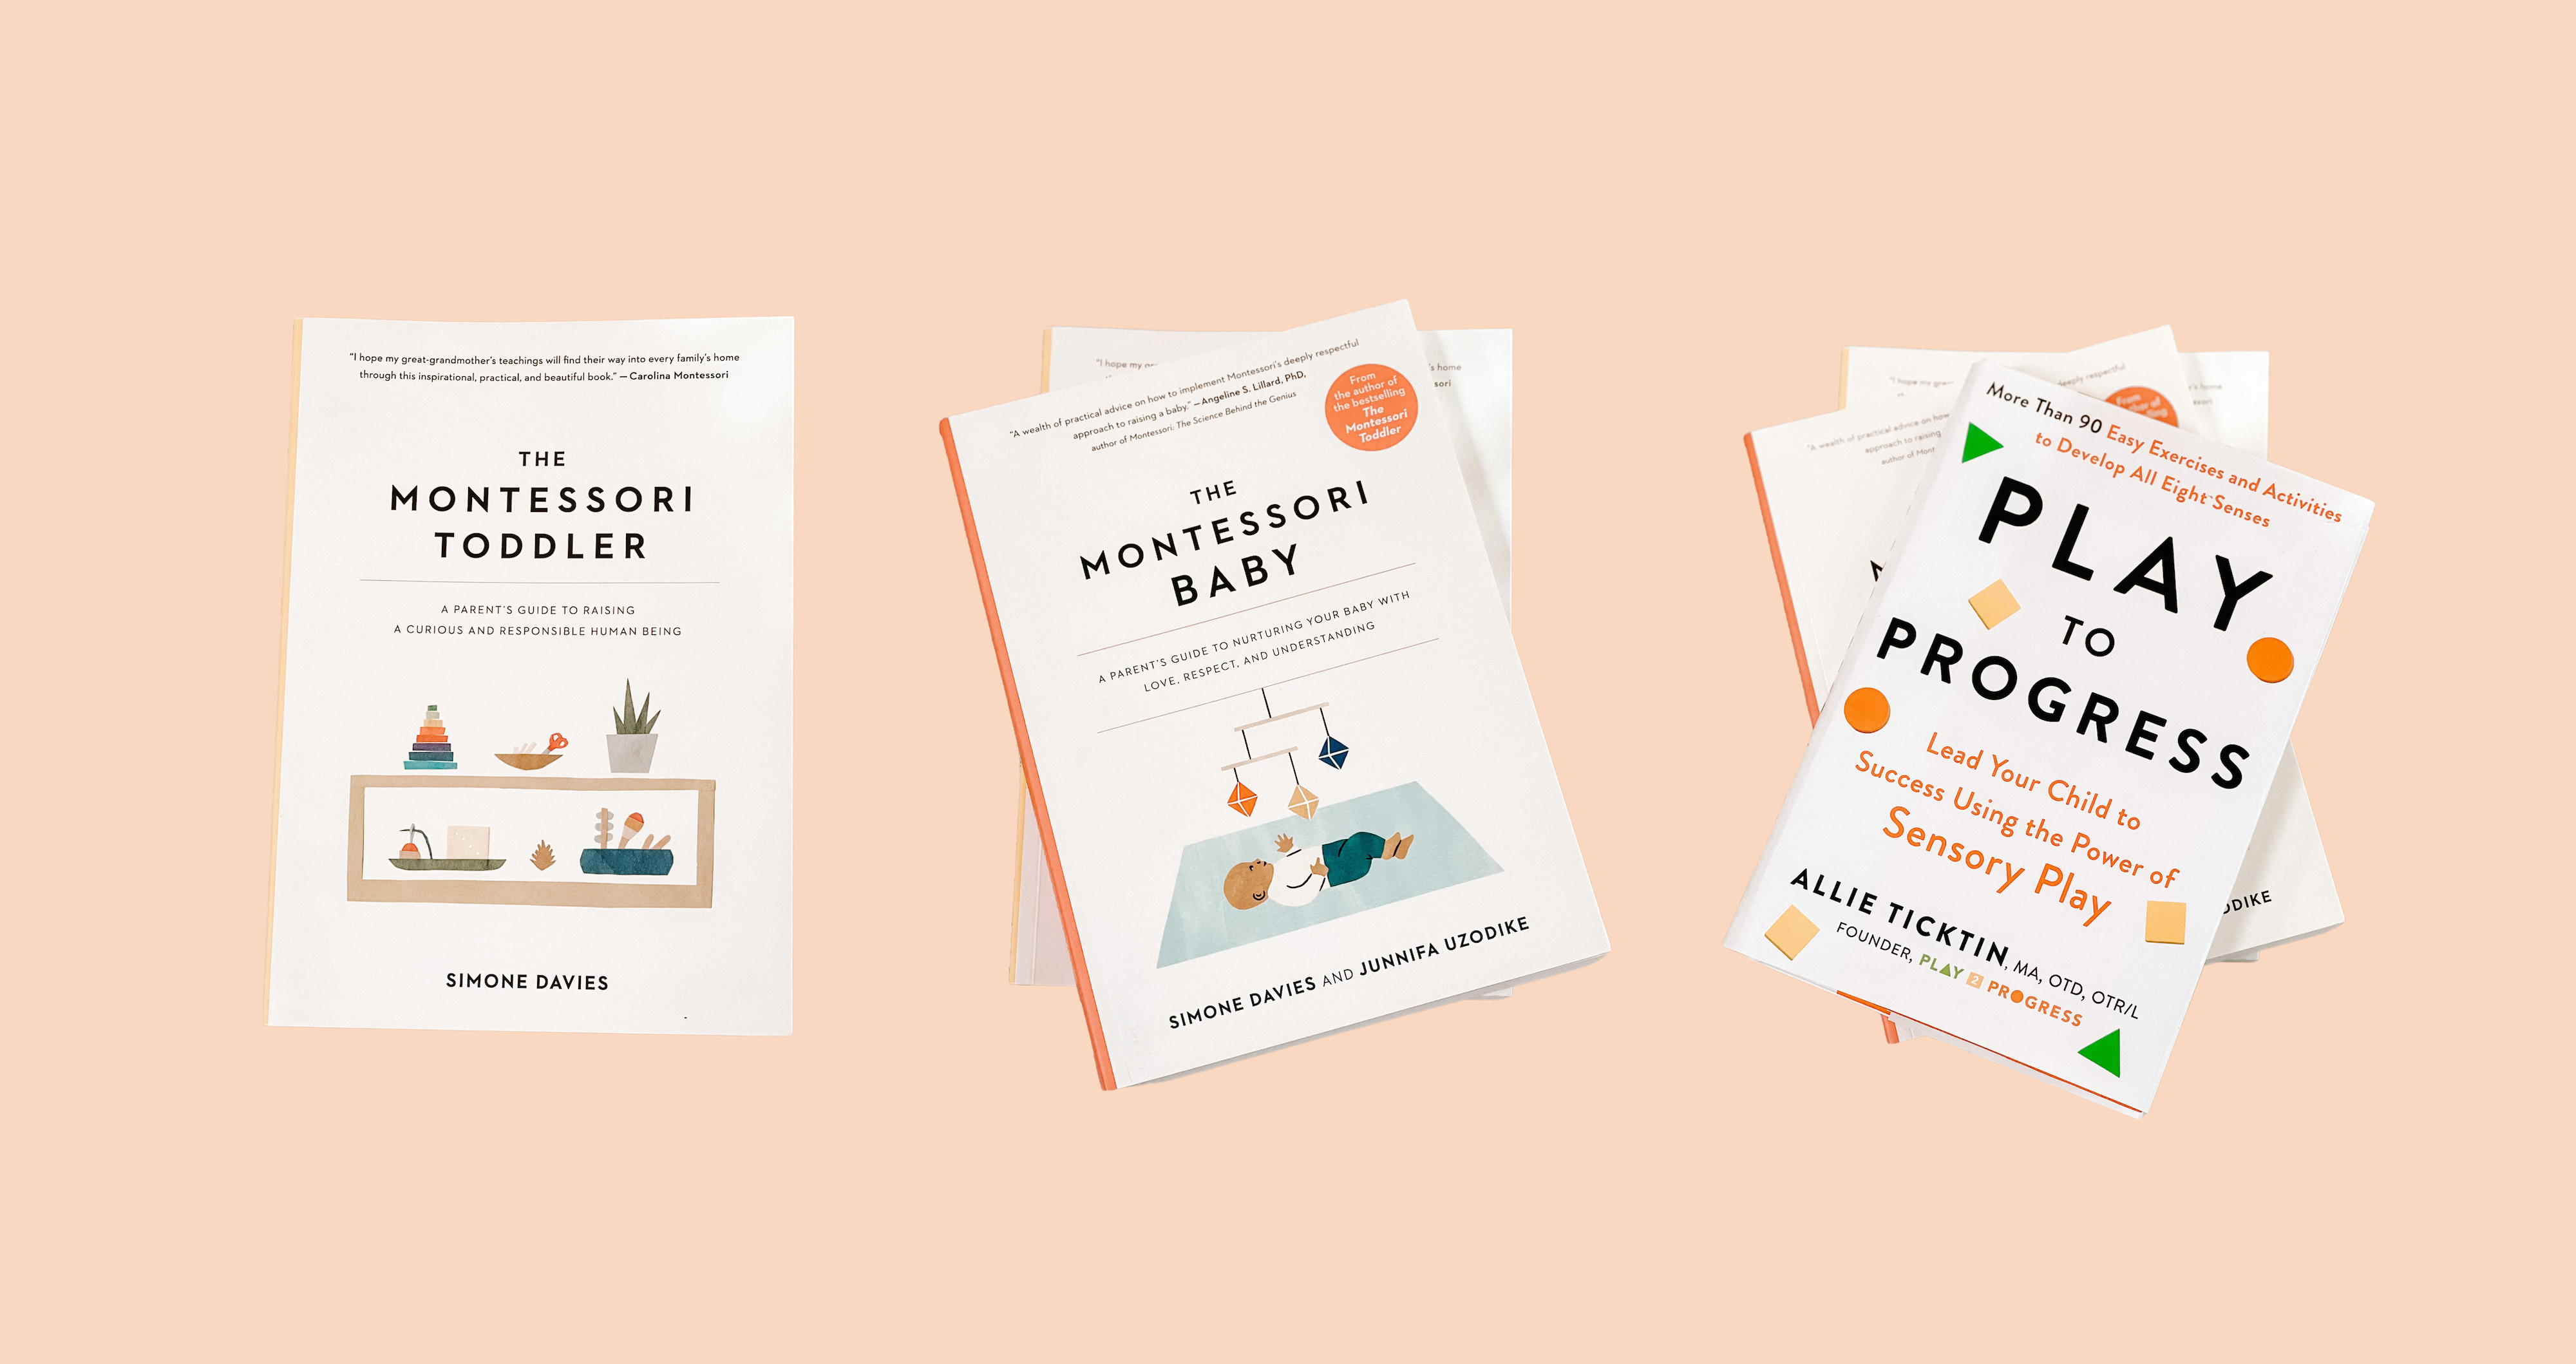 Our 3 Favorite Books About Child Development for Parents